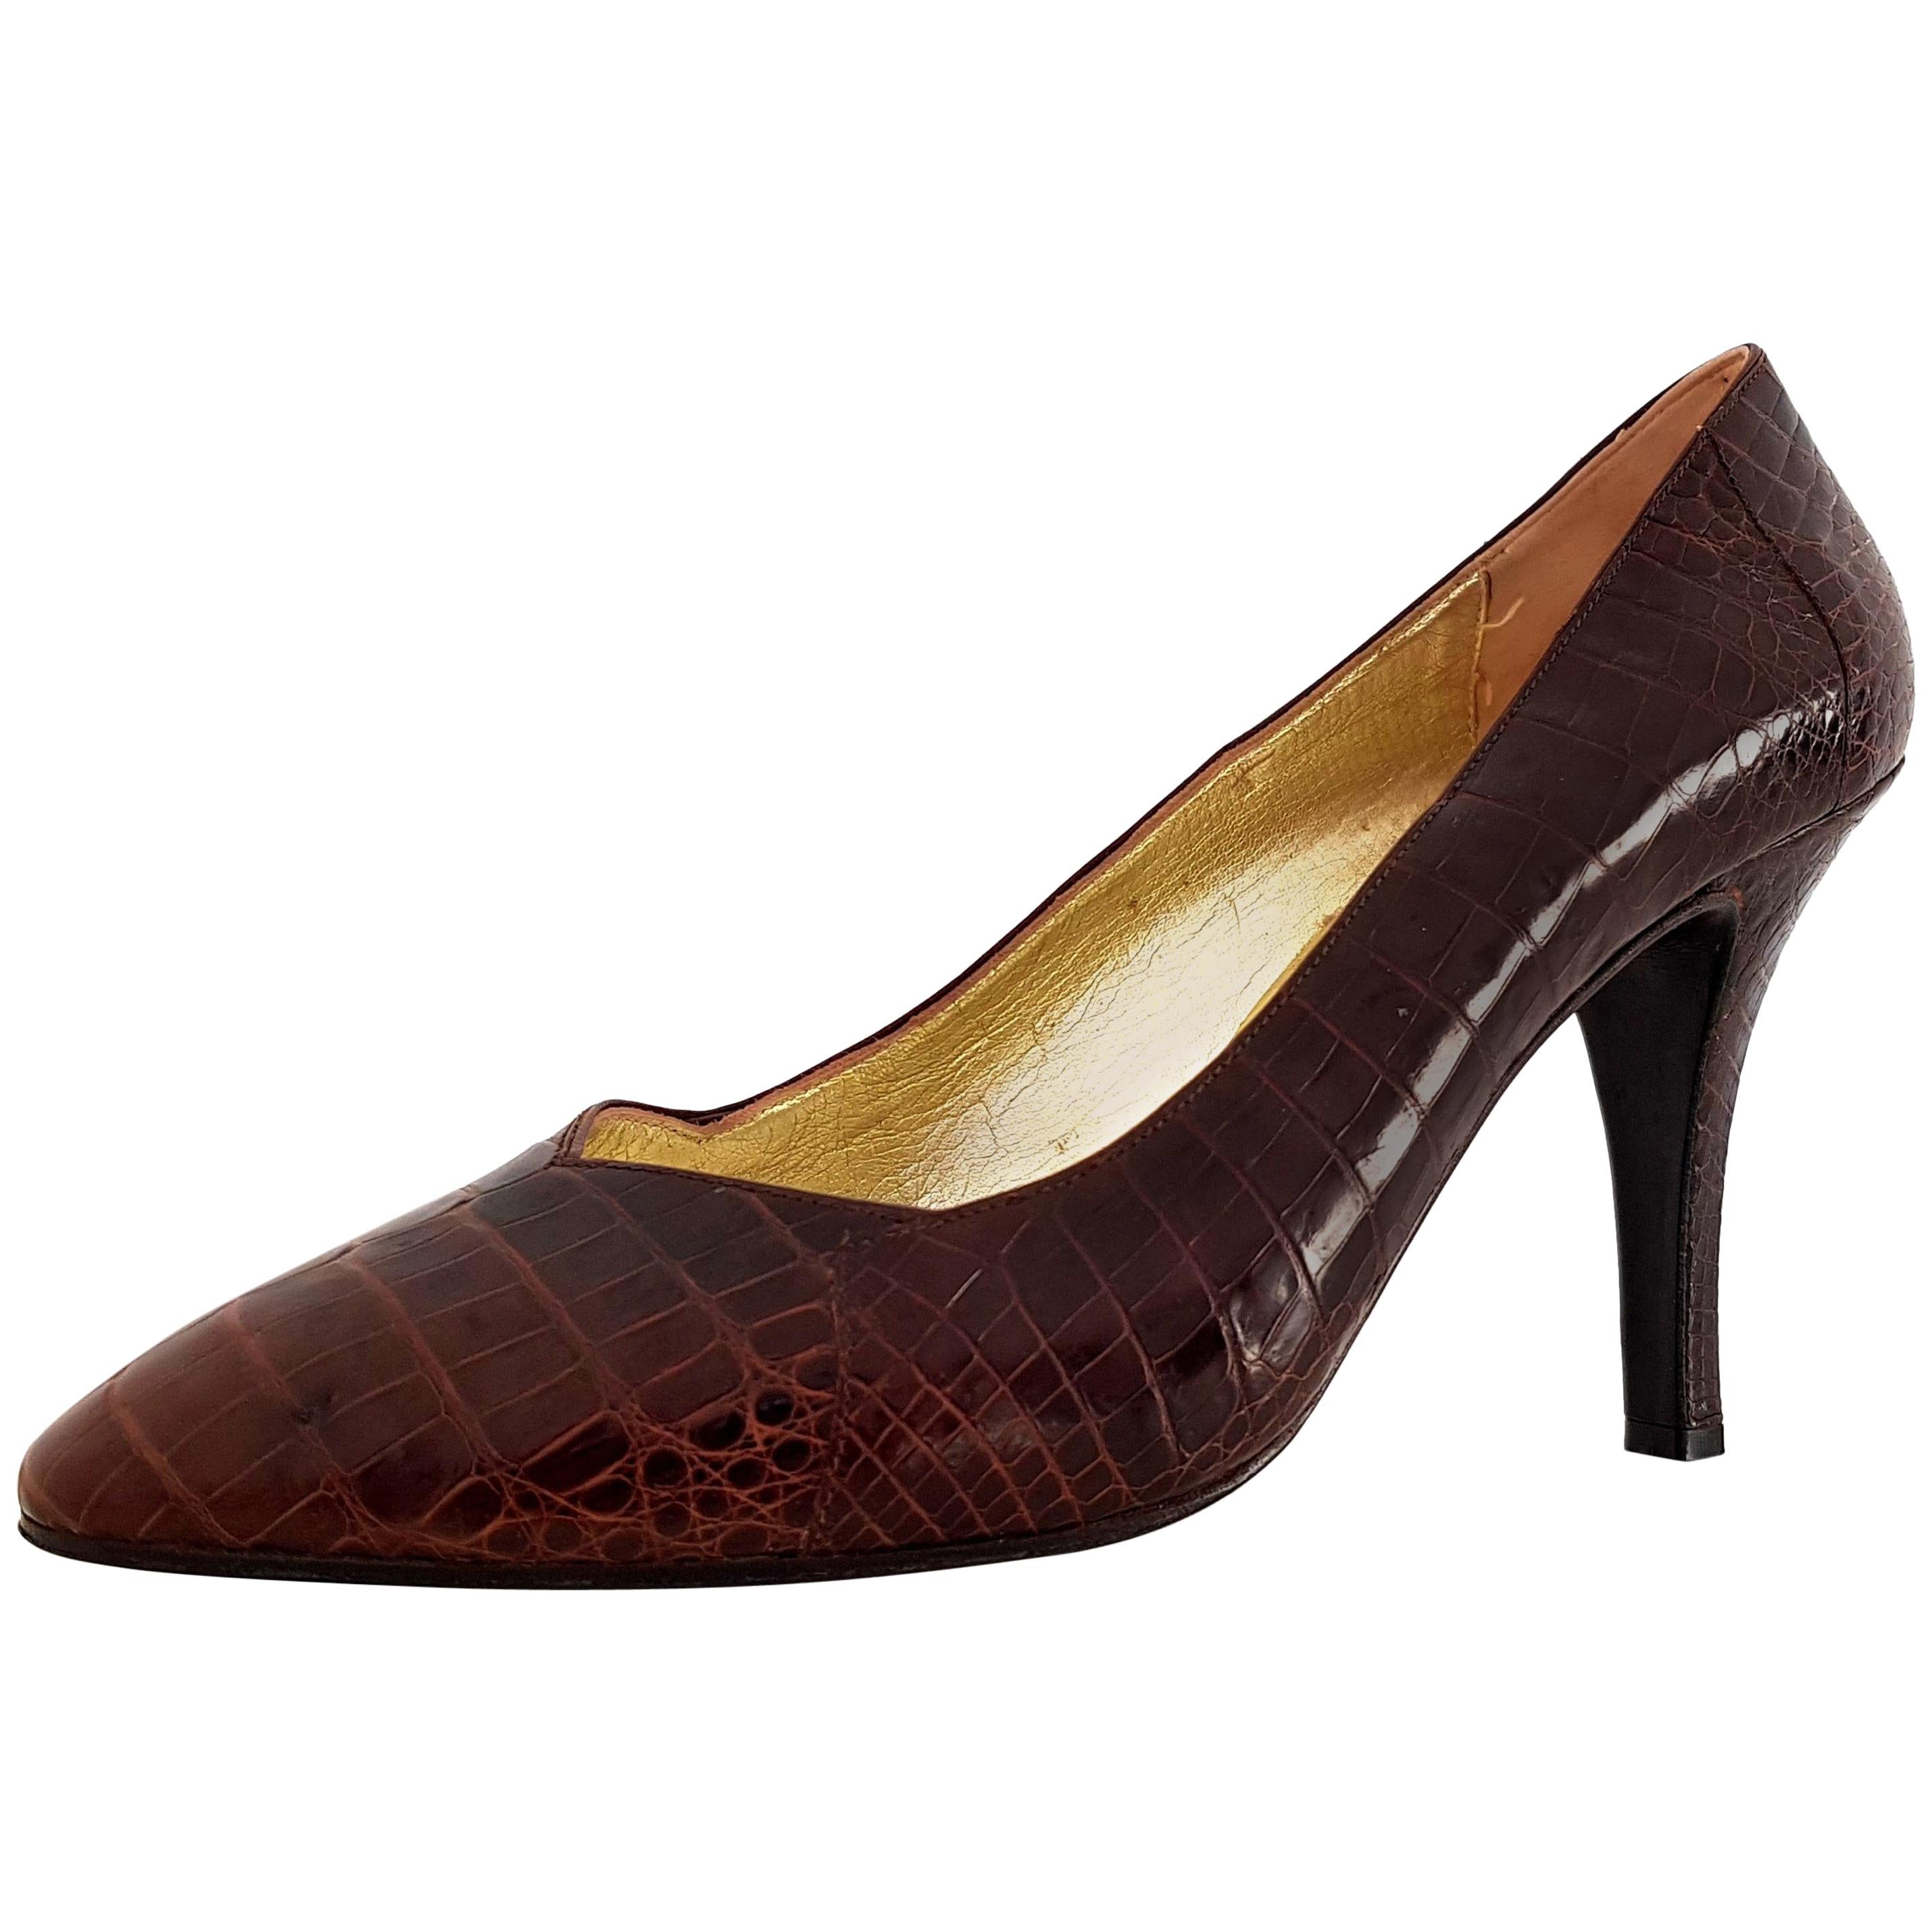 Enzo Albanese Brown Crocodile Leather Heels. Excellent conditions. Size 40 (EU) For Sale